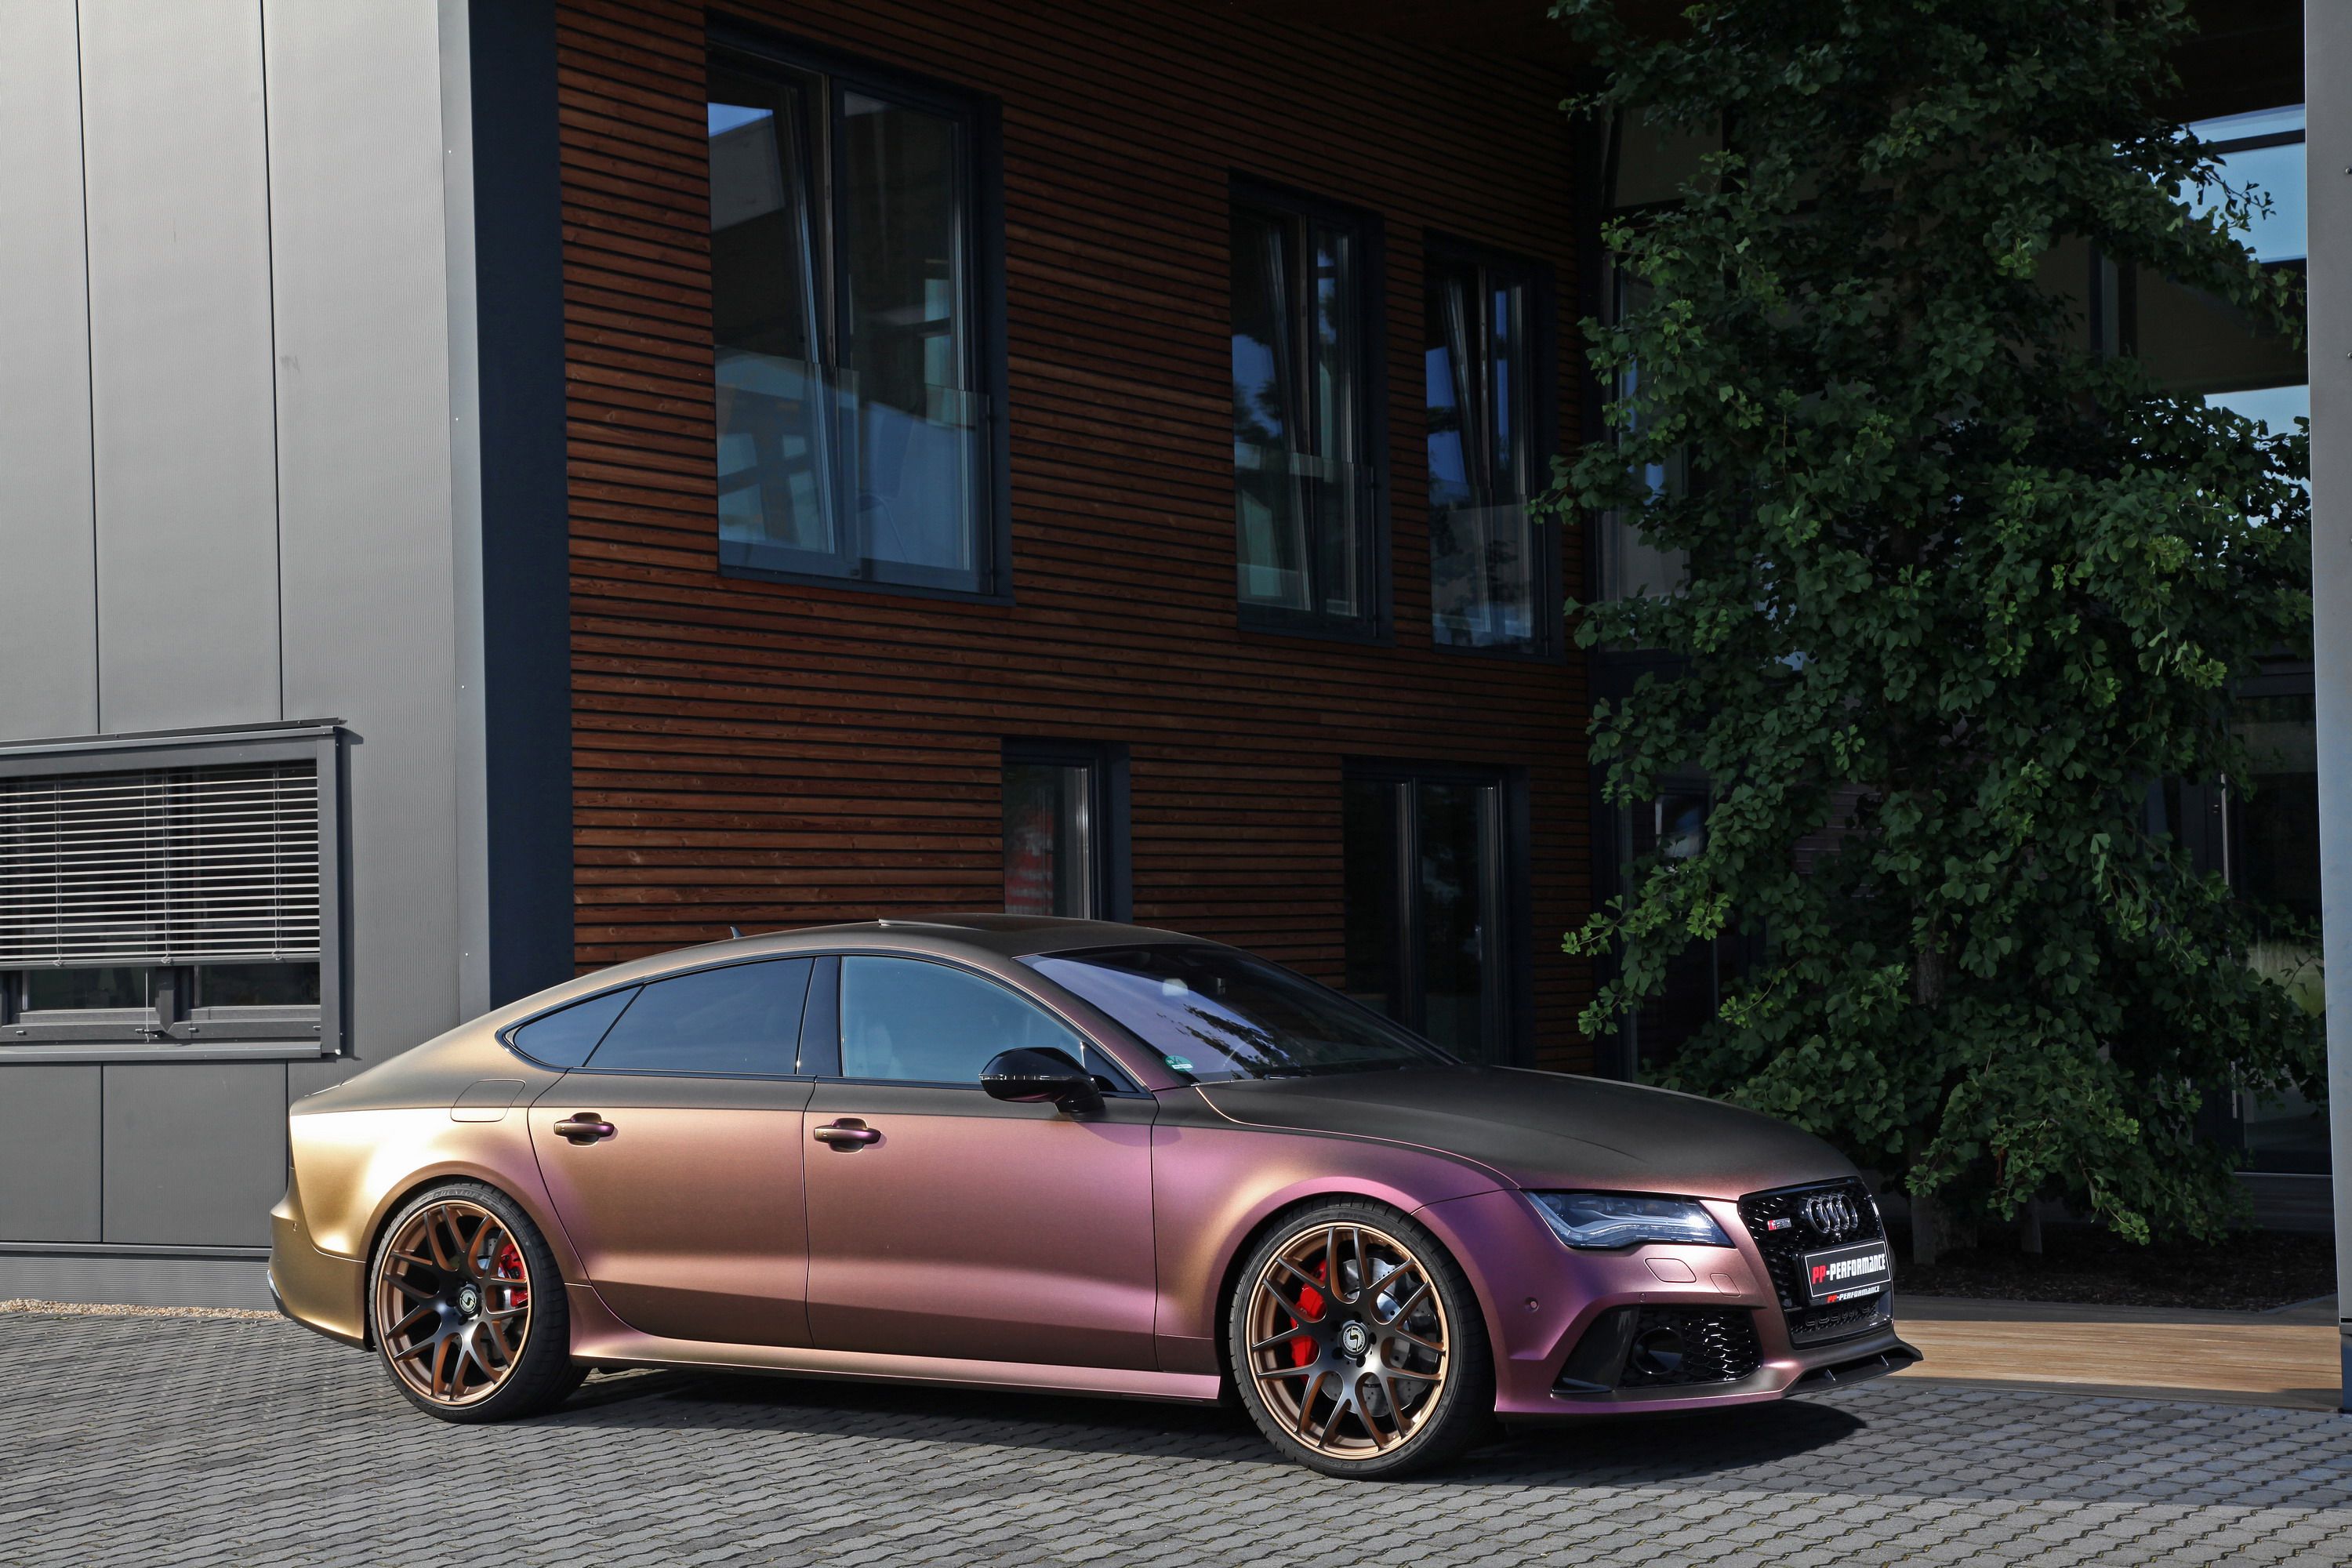 2016 Audi RS7 by PP-Performance